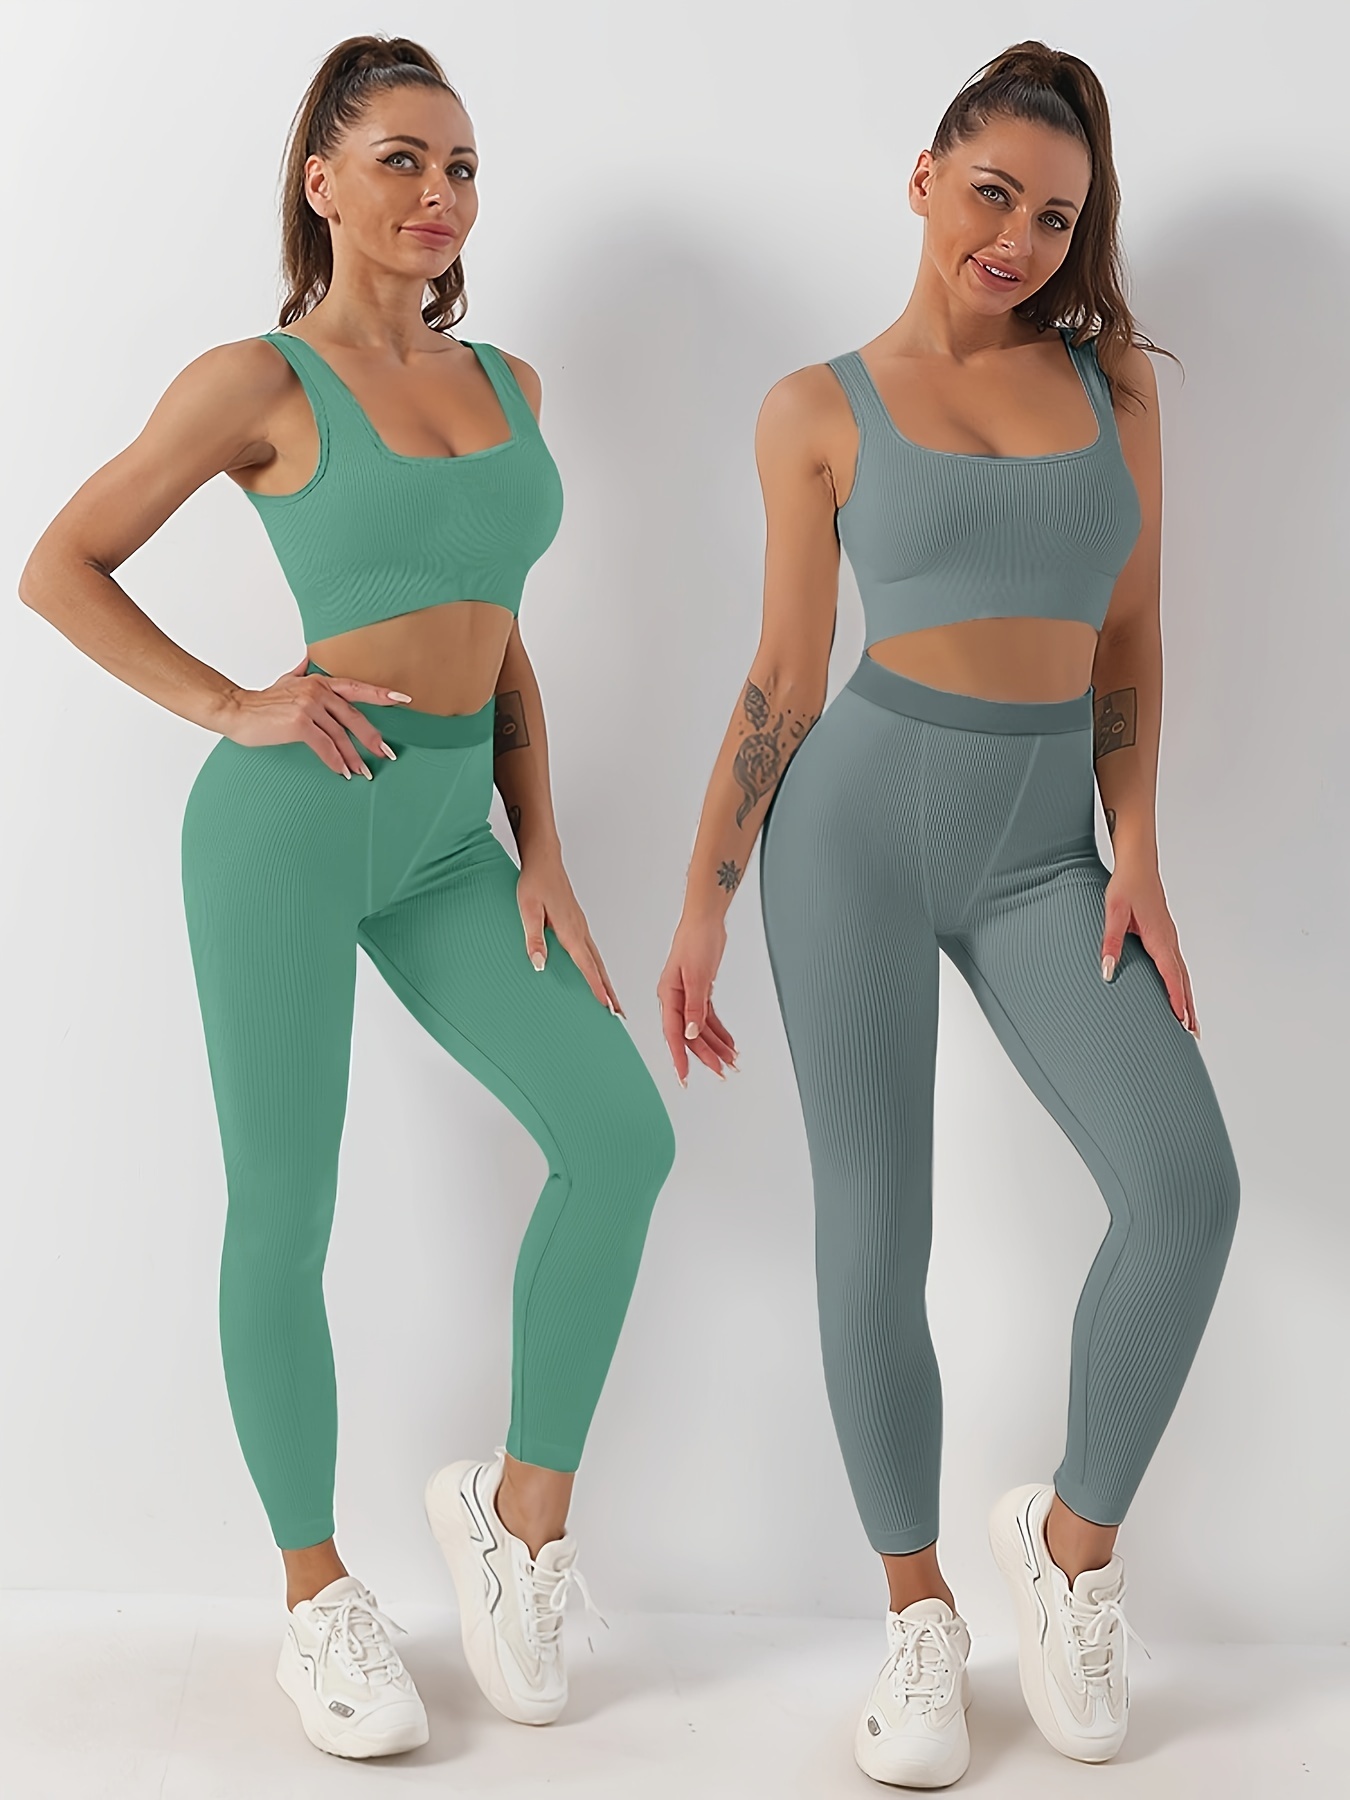 ONLYSHE Womens High Waist Running Workout Sets Yoga Leggings With Crop Tank Tops  Athletic Outfits 2 piece Sprot Sets 